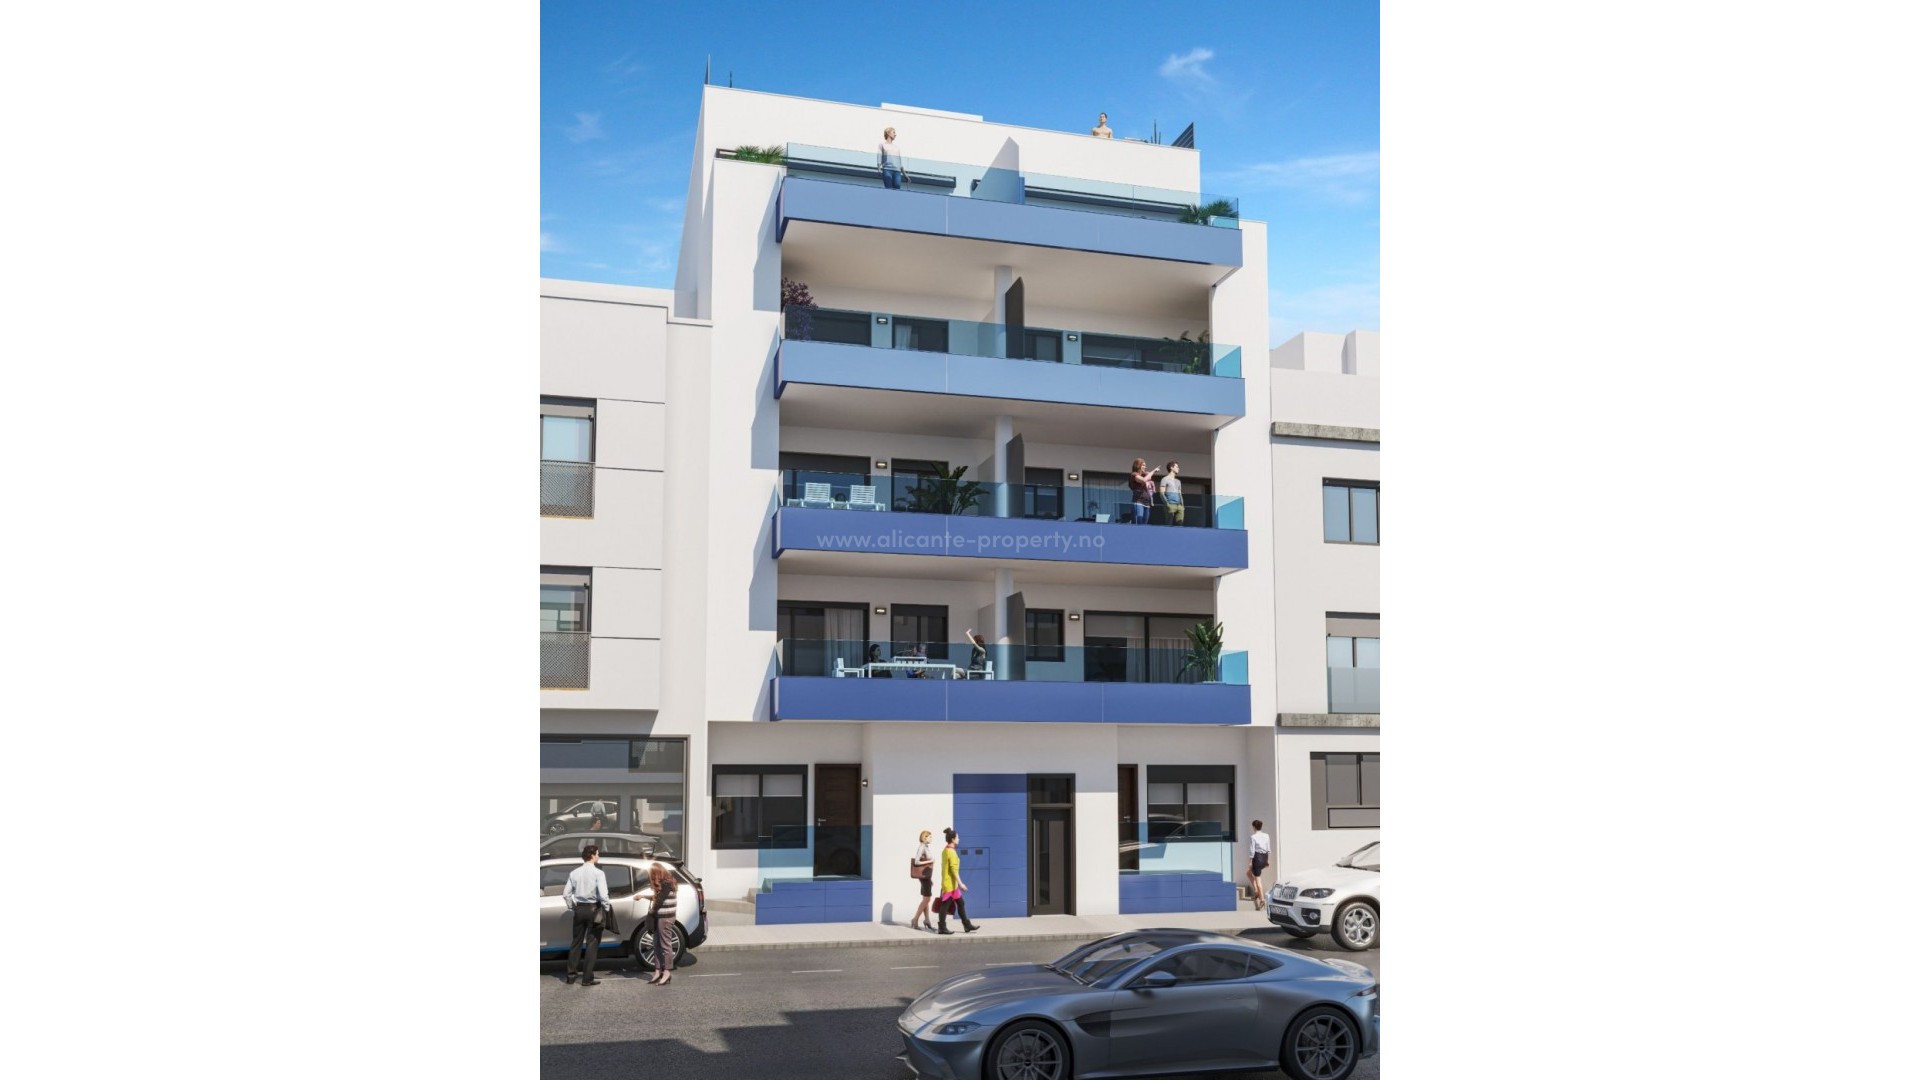 New built apartment complex in Guardamar del Segura, 3 bedrooms and 2 bathrooms, open plan kitchen with living room. Shared spa, gym, solarium, jacuzzi.